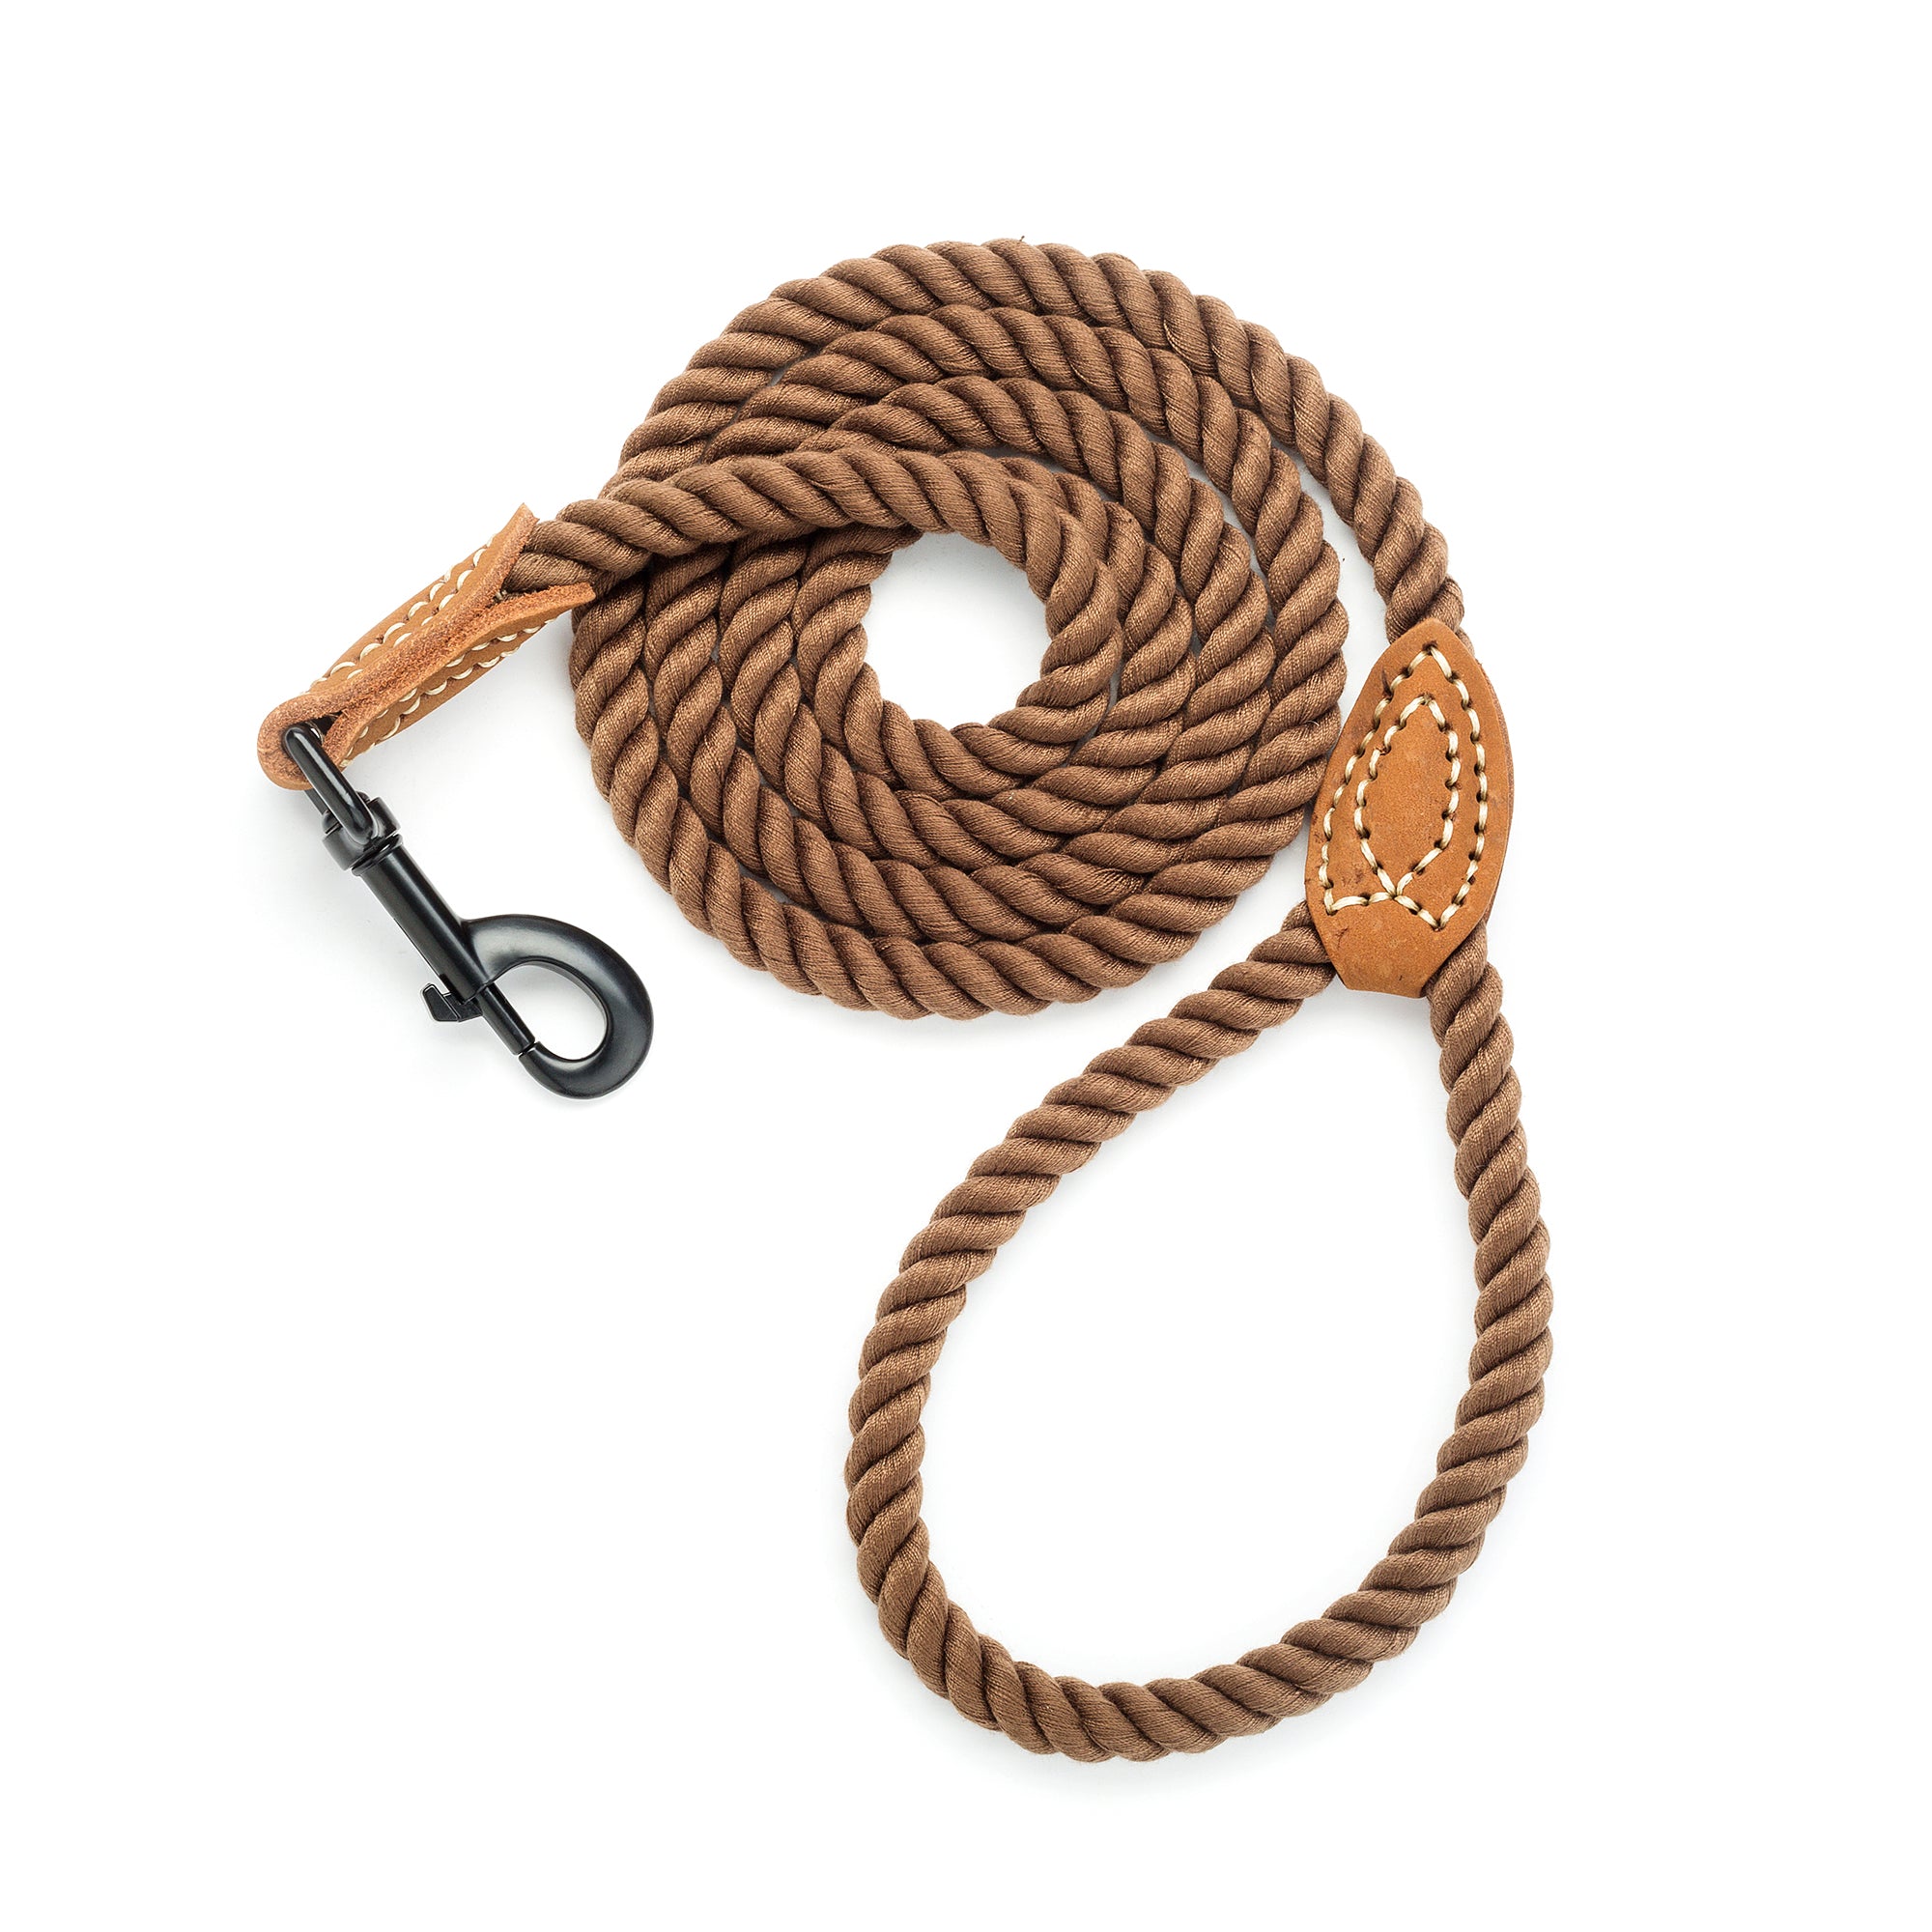 Braided Cotton Rope Leash with Leather Tip